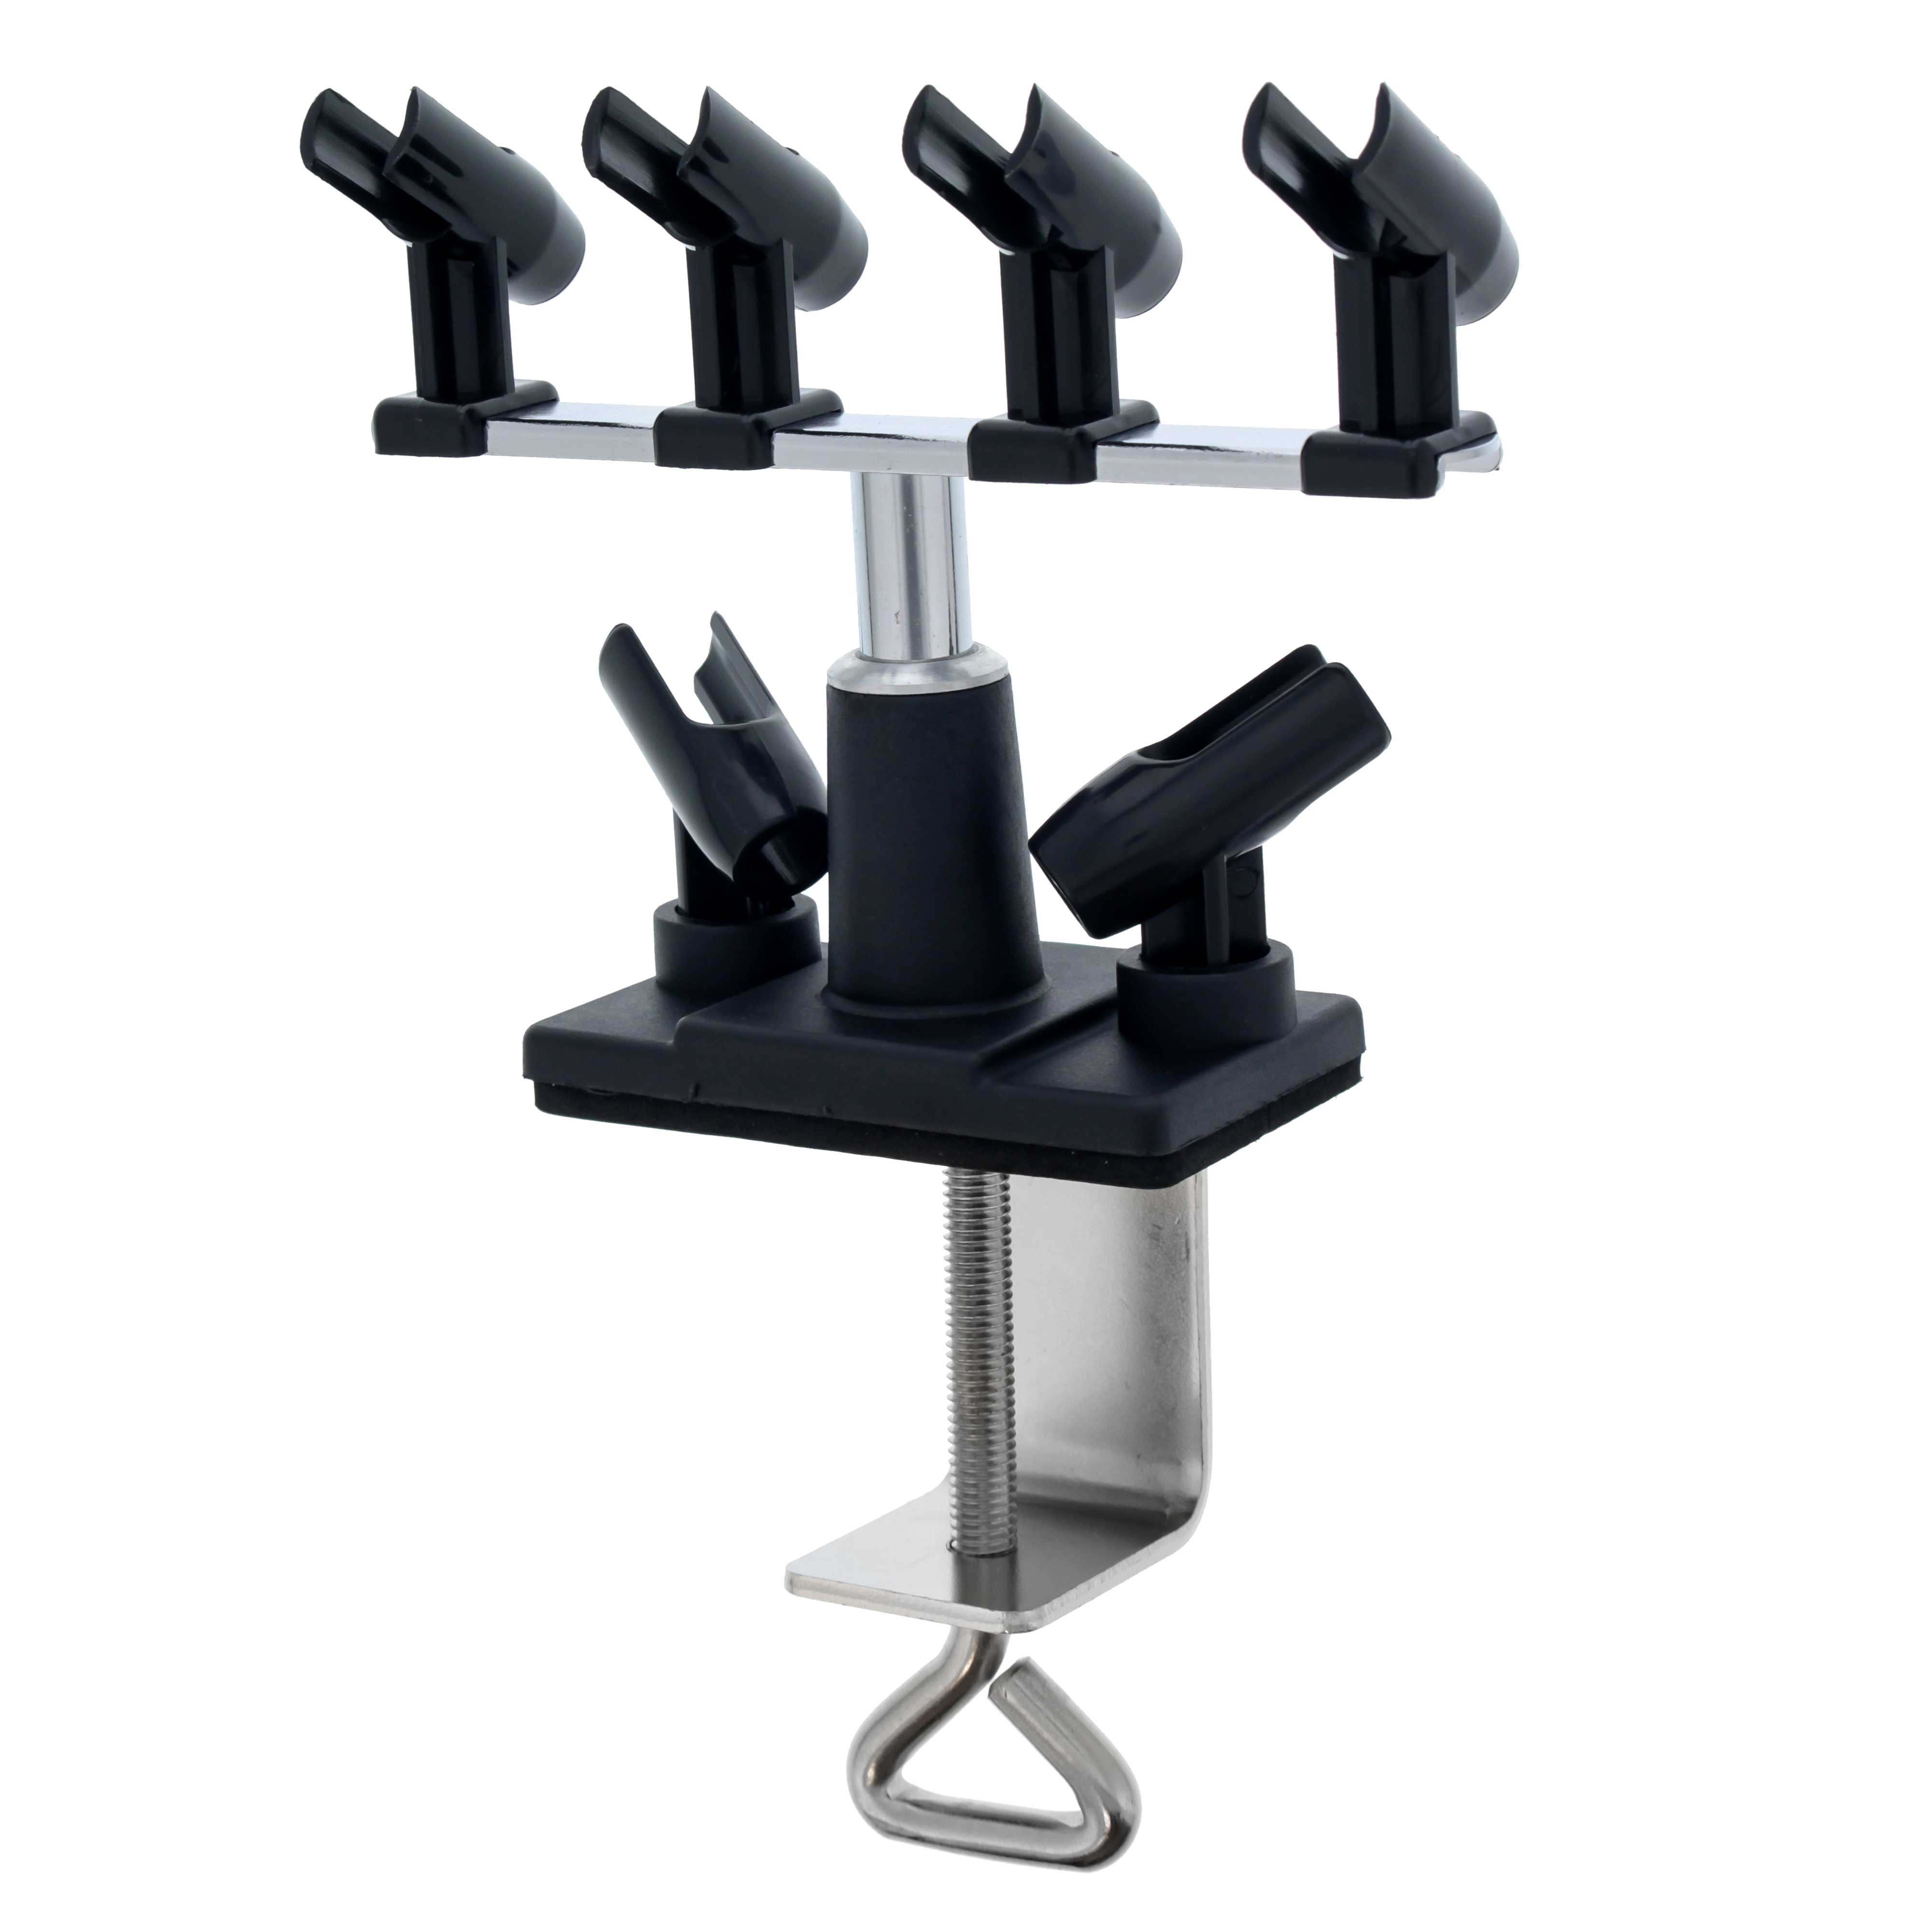 SAGUD Airbrush Holder Clamp-On Style Air Brush Station Stand Kit 360 Rotate Holds Up to 6 Airbrush Guns